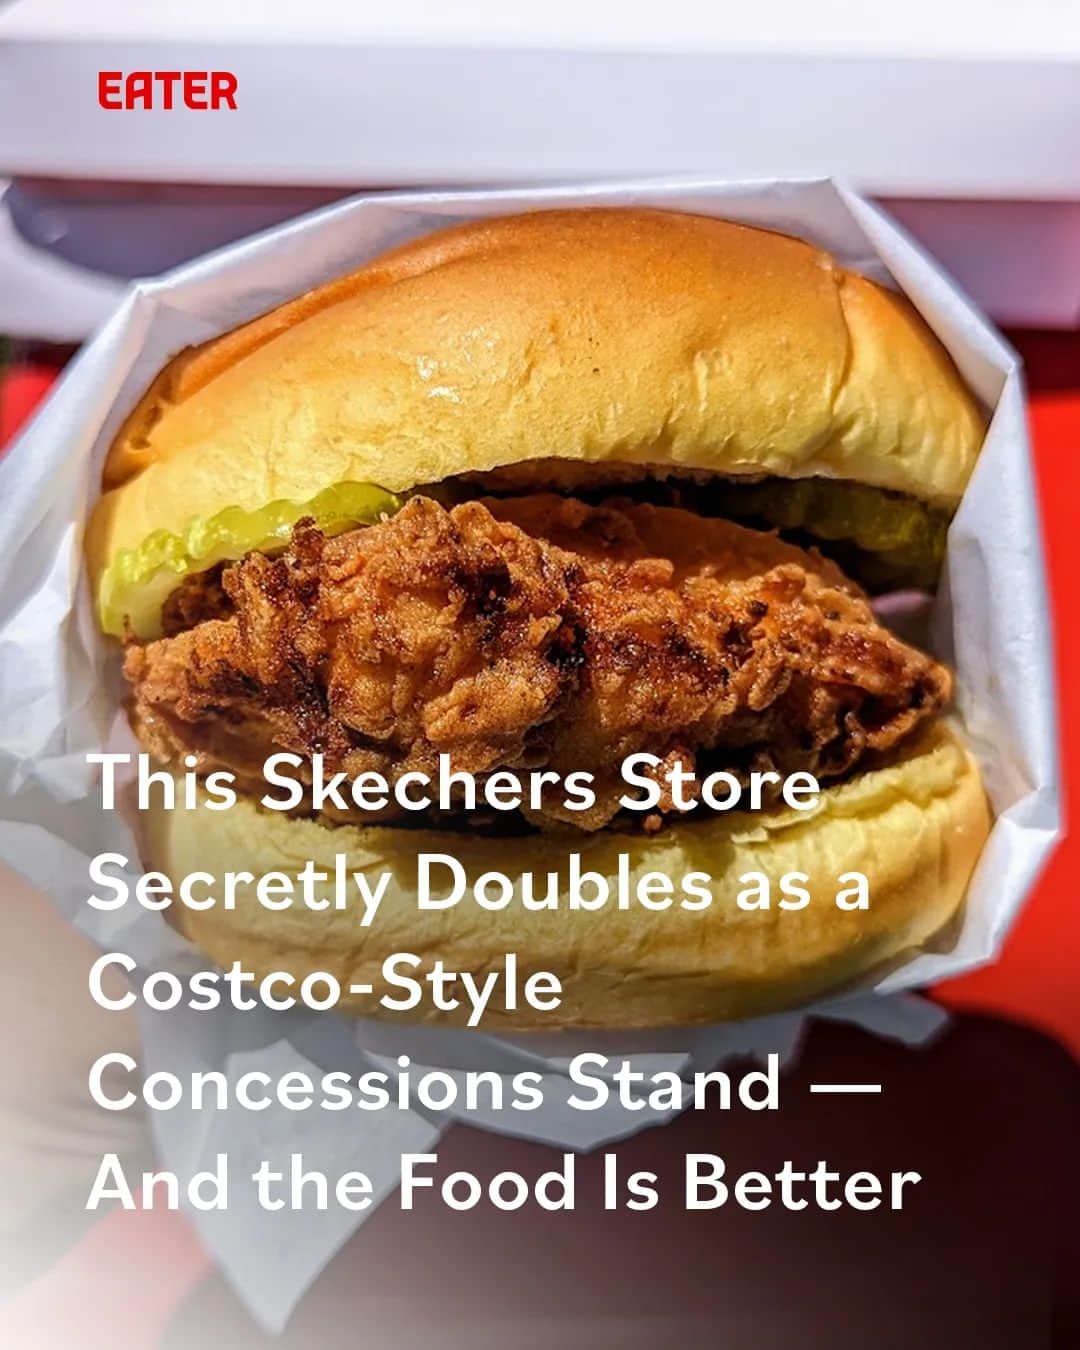 Eater LAのインスタグラム：「Have you heard there’s a food window at Skechers (@skechers)? It looks kind of like a Costco food court, it’s almost as cheap, and it doesn’t even require a membership. Park at the vast lot next to the warehouse-sized Skechers shoe store in Gardena, next to the intersection of the 110 and 405 freeways, and find that there’s almost always a line of people waiting at the Food Spot window for $2.50 cheese pizza slices, $2.50 Nathan’s all-beef hot dogs, and $5 double cheeseburgers.  Without too much fanfare, the Skechers food spot opened on May 3, 2023, serving classic American fast-food dishes at prices that feel shockingly low. The semi-secret project gives one of the shoe brand’s busiest retail stores an extra feature to go along with reasonably priced footwear: tasty, decently-cooked food that almost anyone could afford.  Read about the super-affordable spot, written by Eater LA lead editor Matthew Kang (@mattatouille), by clicking on the link in bio.」